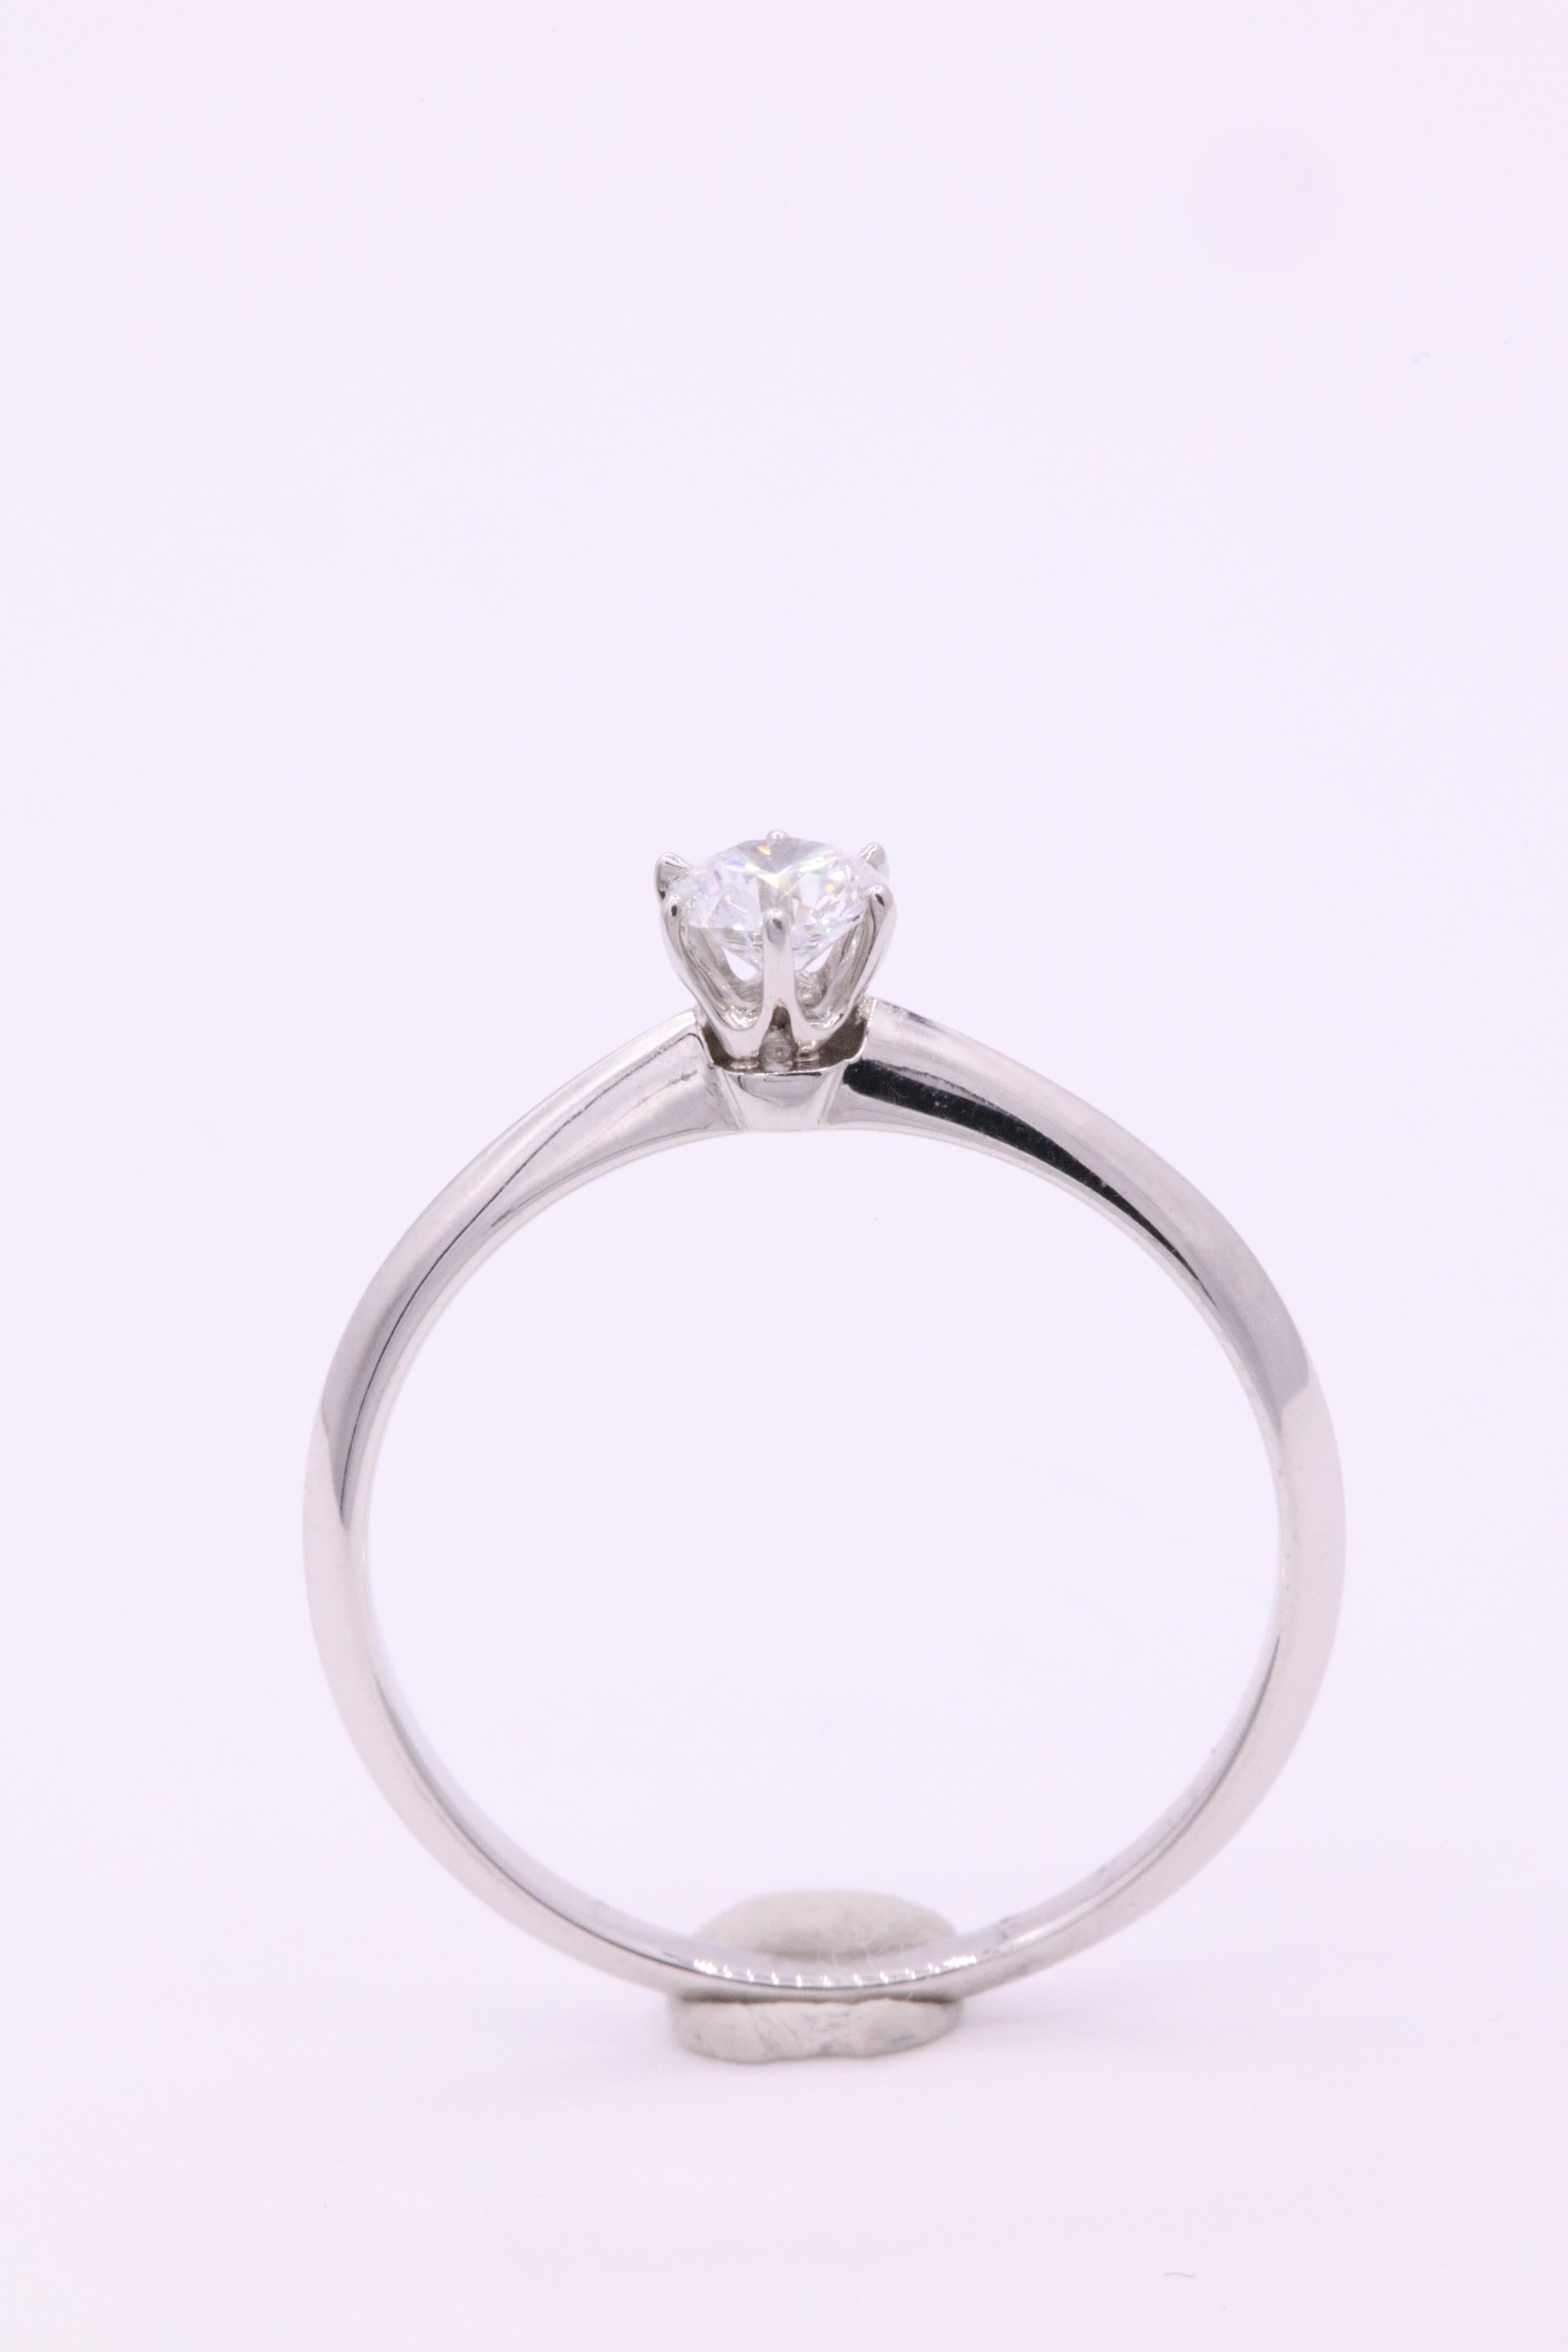 Round Cut Elizabeth Taylor Ping-Pong Tiffany & Co. Diamond Solitaire Ring F VVS2